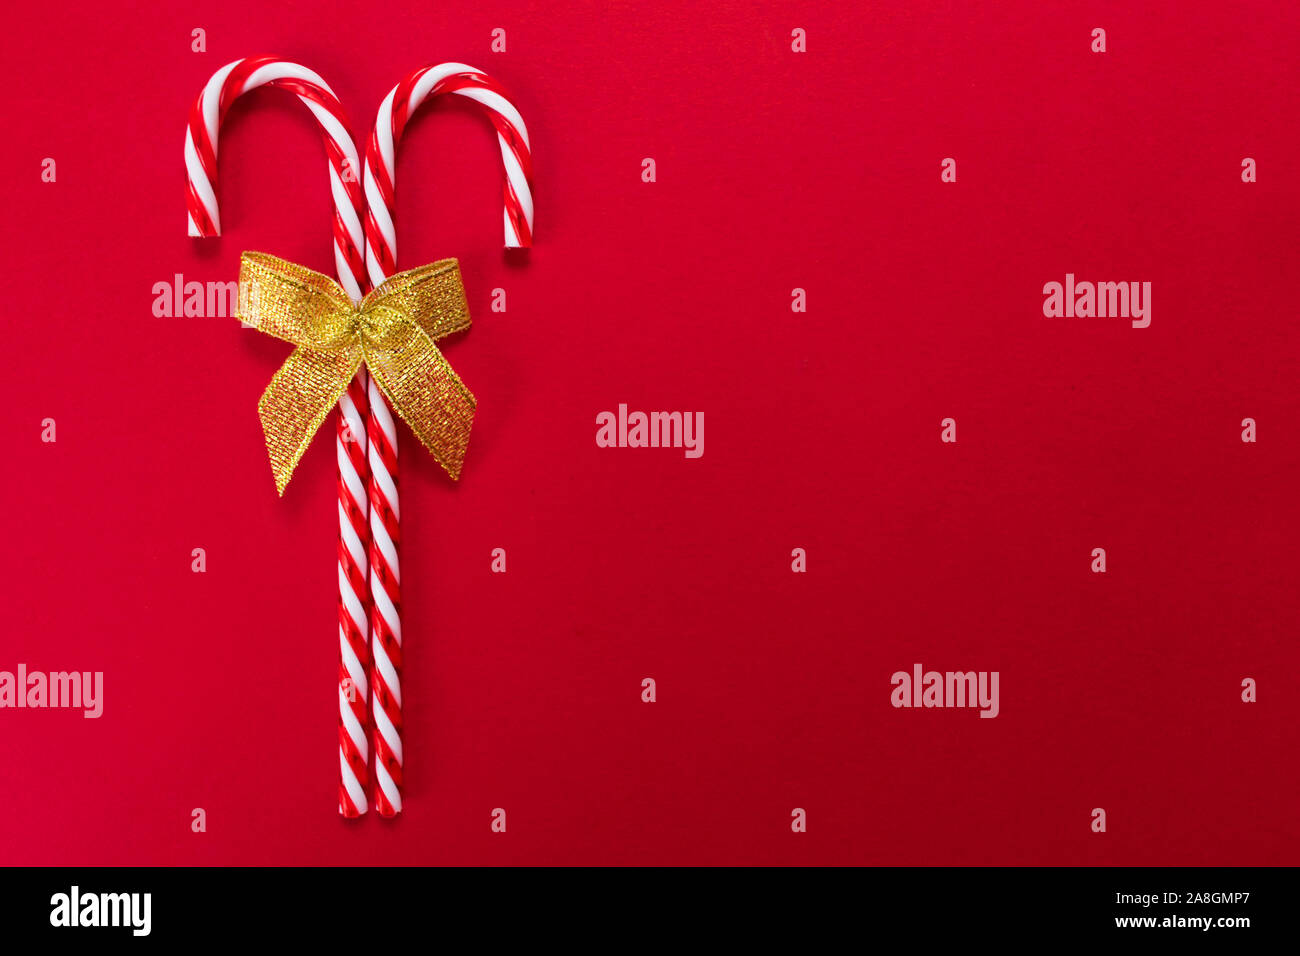 Two christmas candy canes with golden bow on red background. Copy space. Stock Photo